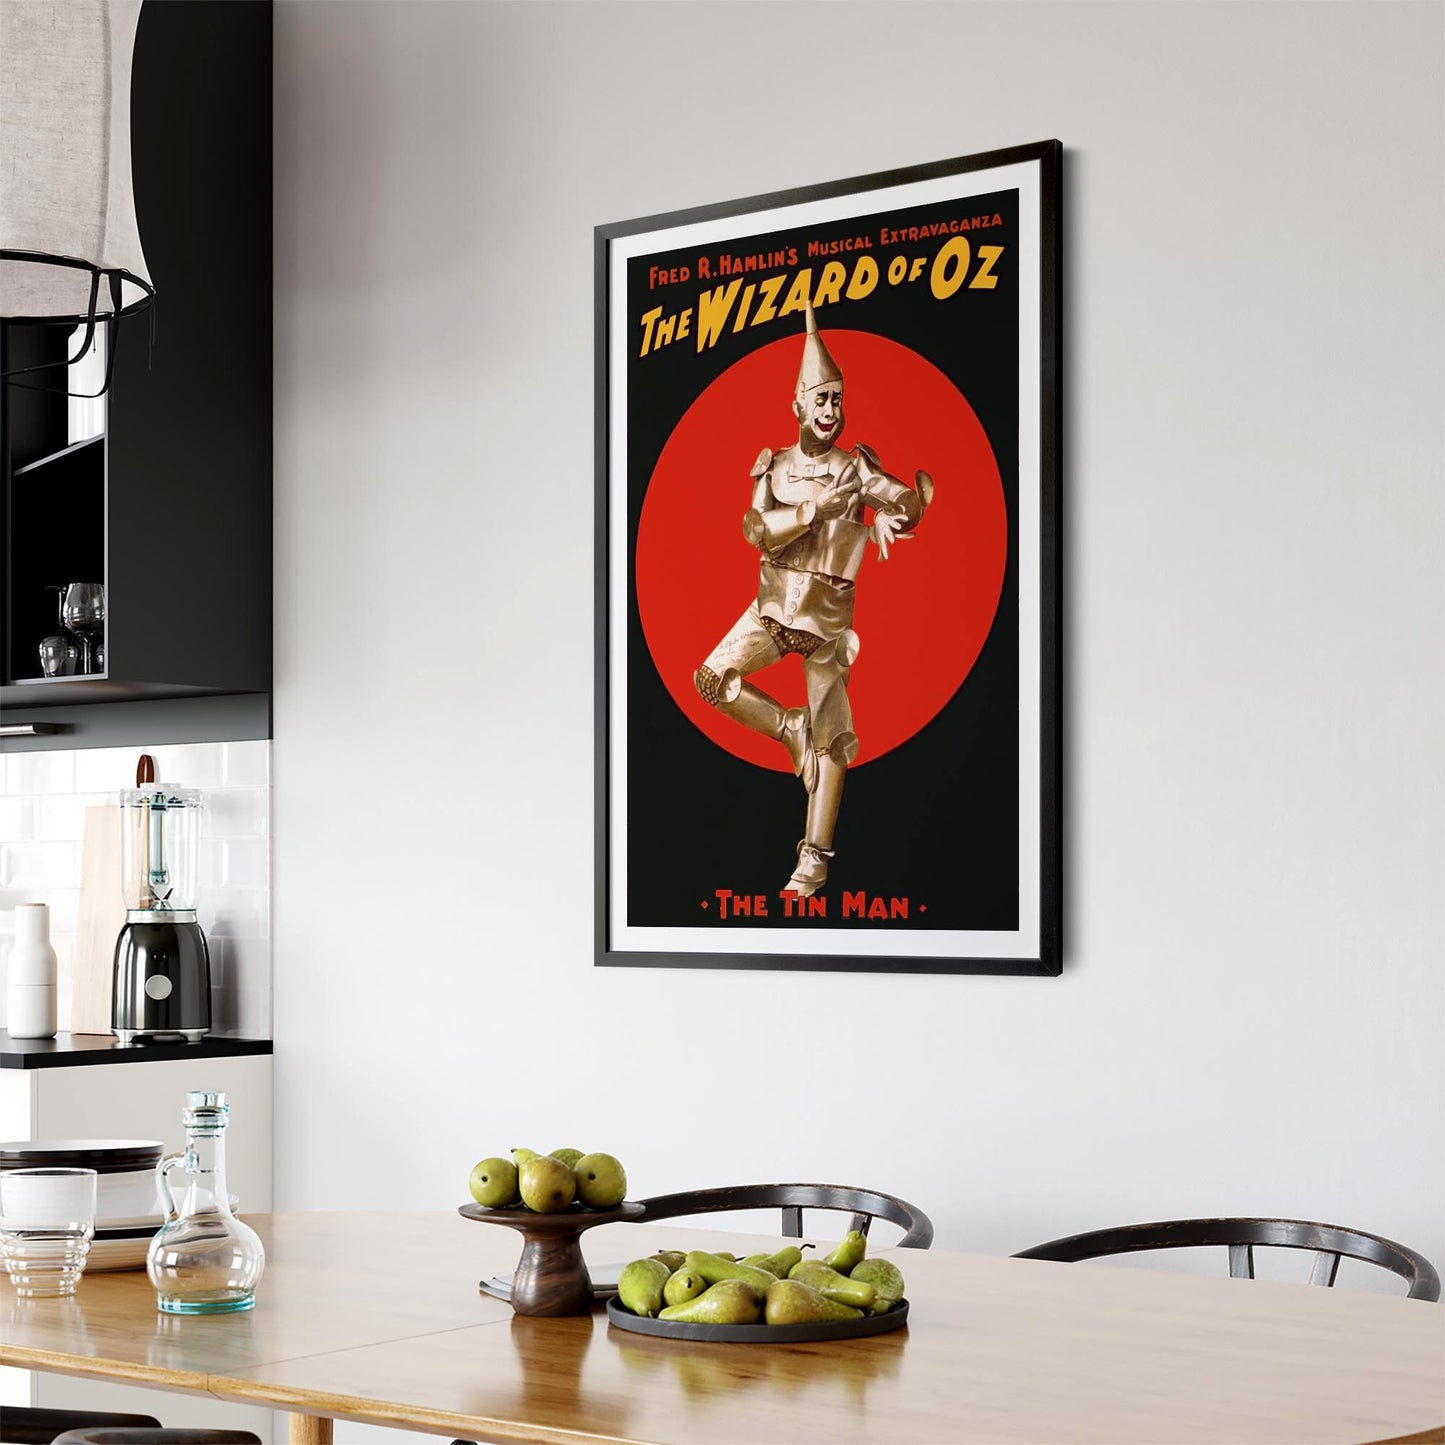 The Wizard of Oz Vintage Advert Wall Art - The Affordable Art Company